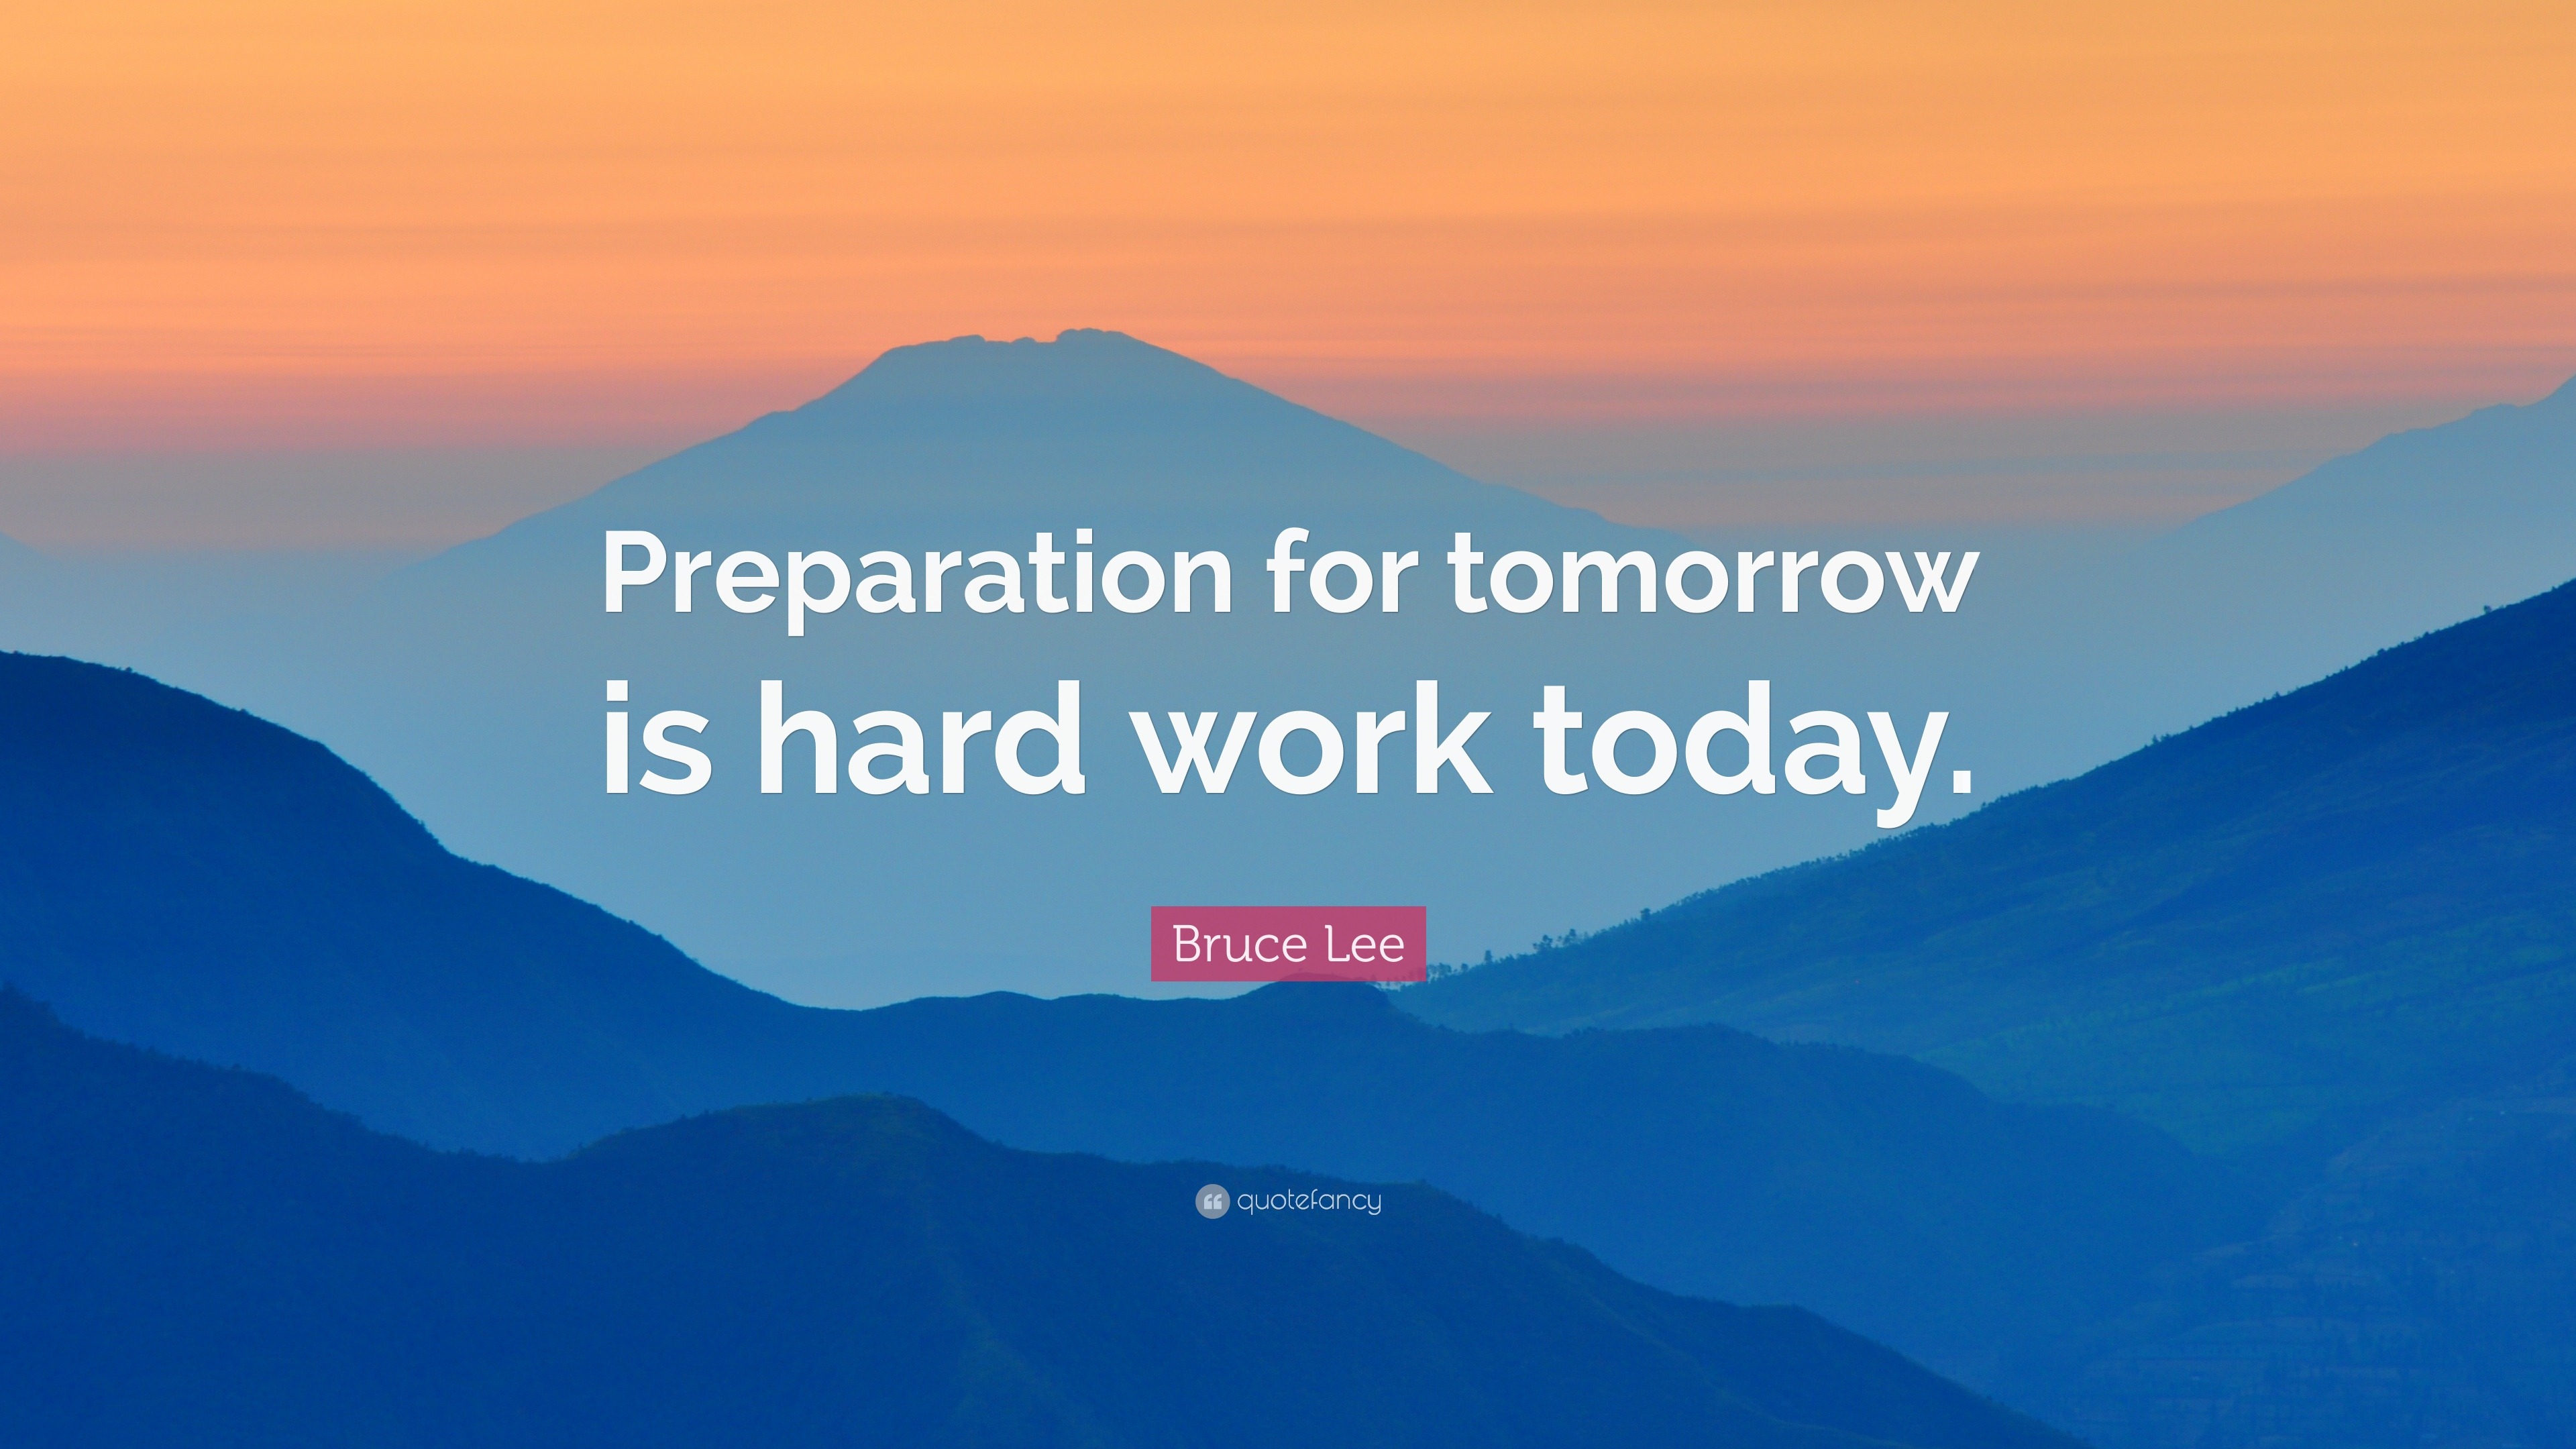 Bruce Lee Quote: “Preparation for tomorrow is hard work today.”